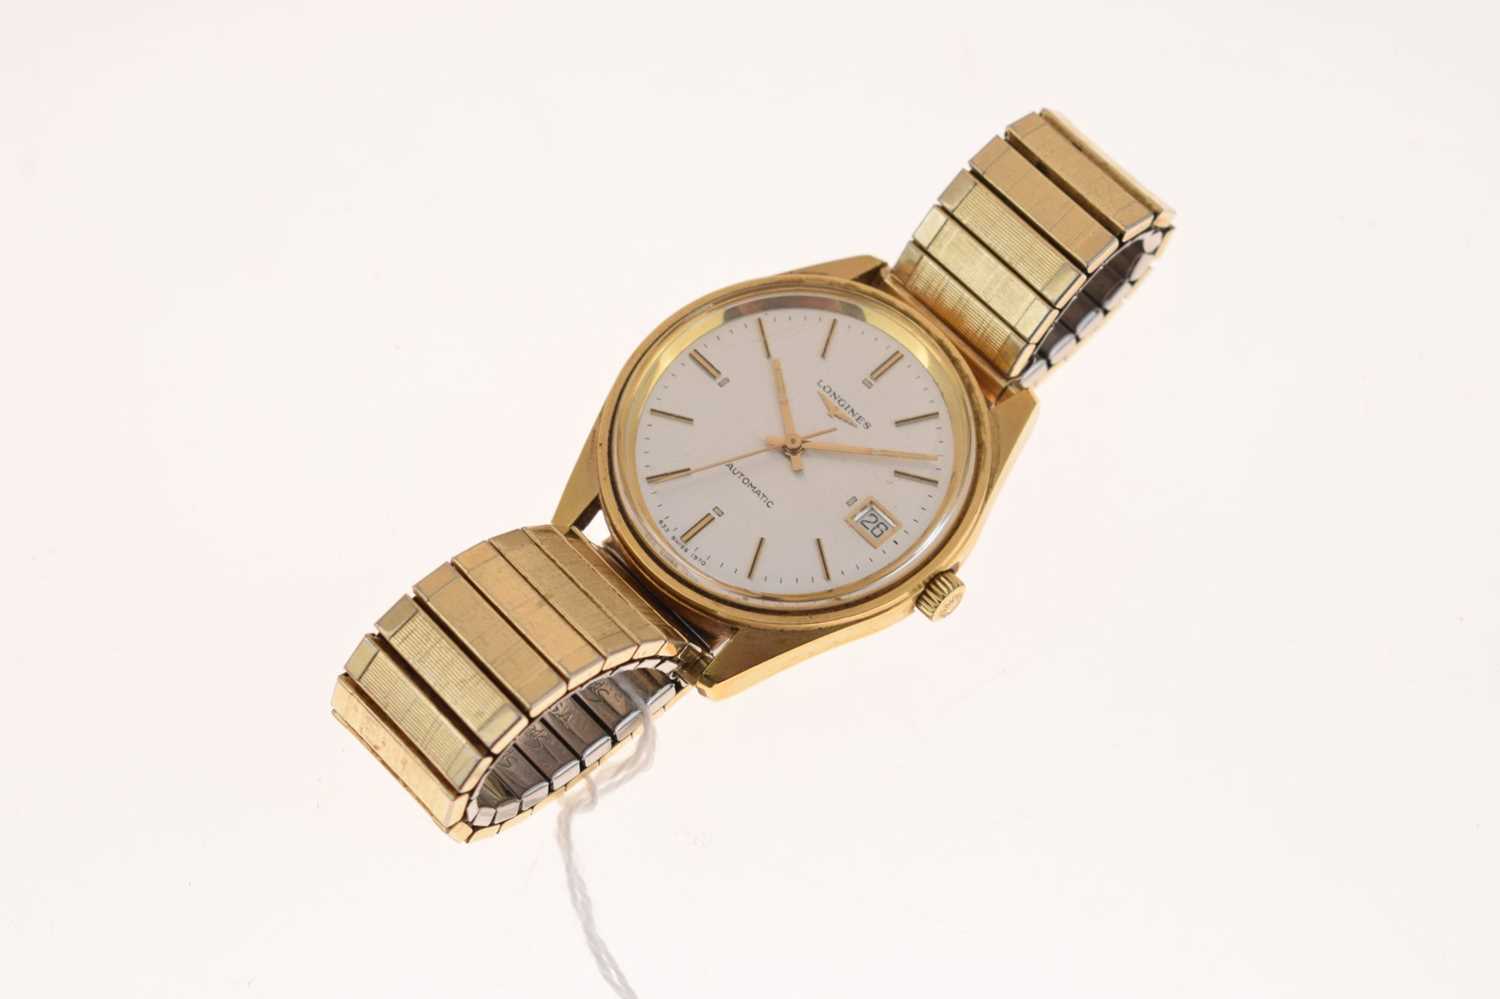 Longines - Gentleman's gold plated automatic bracelet watch - Image 2 of 8